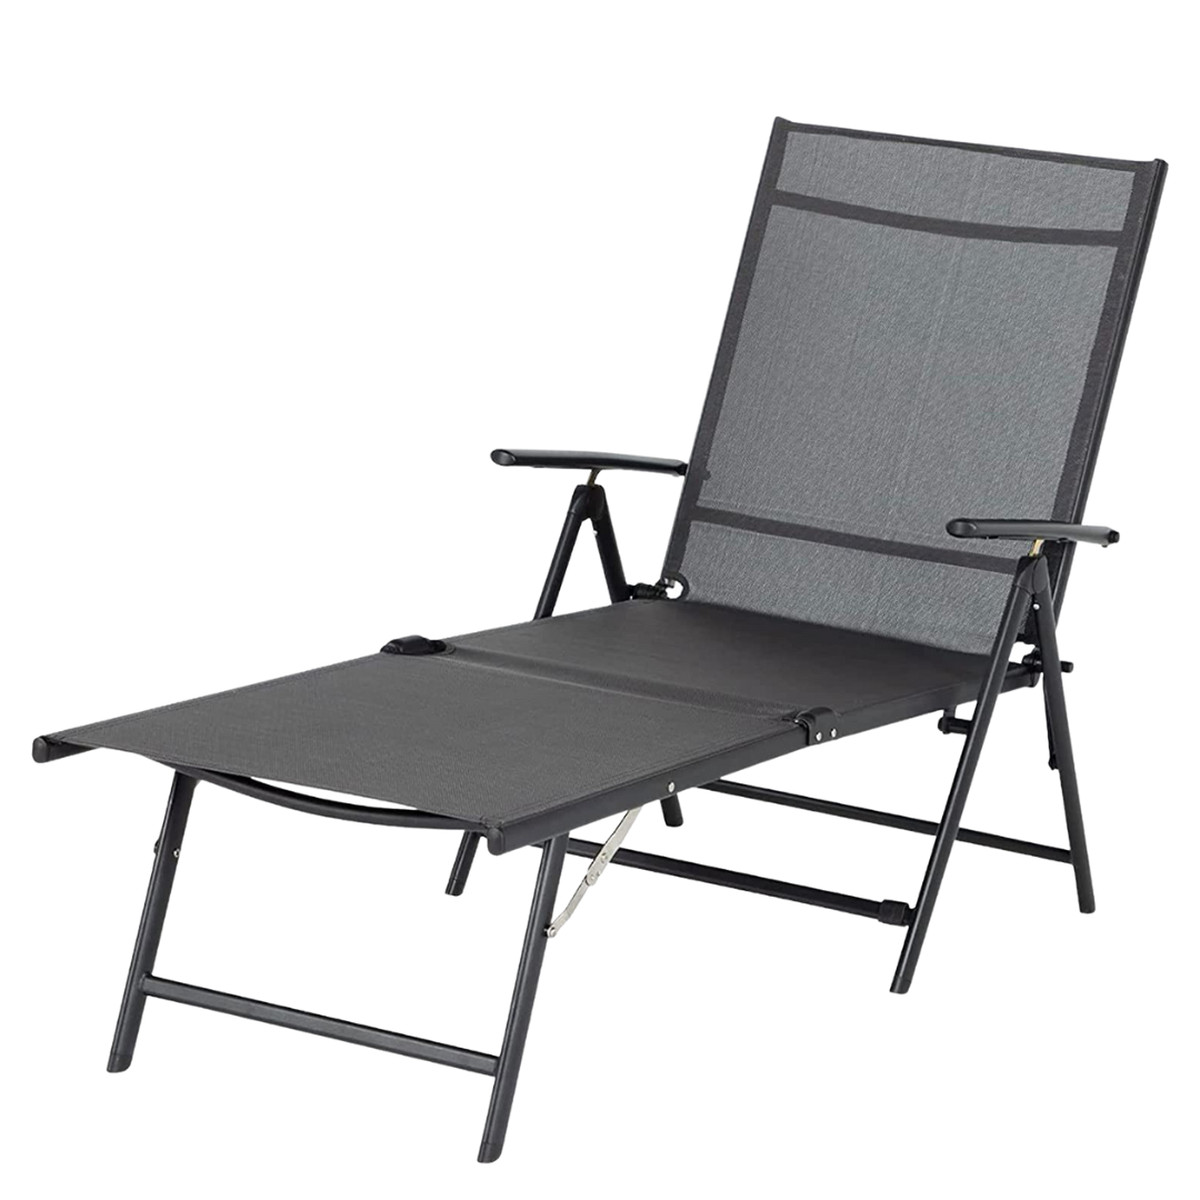 Esright Chaise Lounge Chair in gray